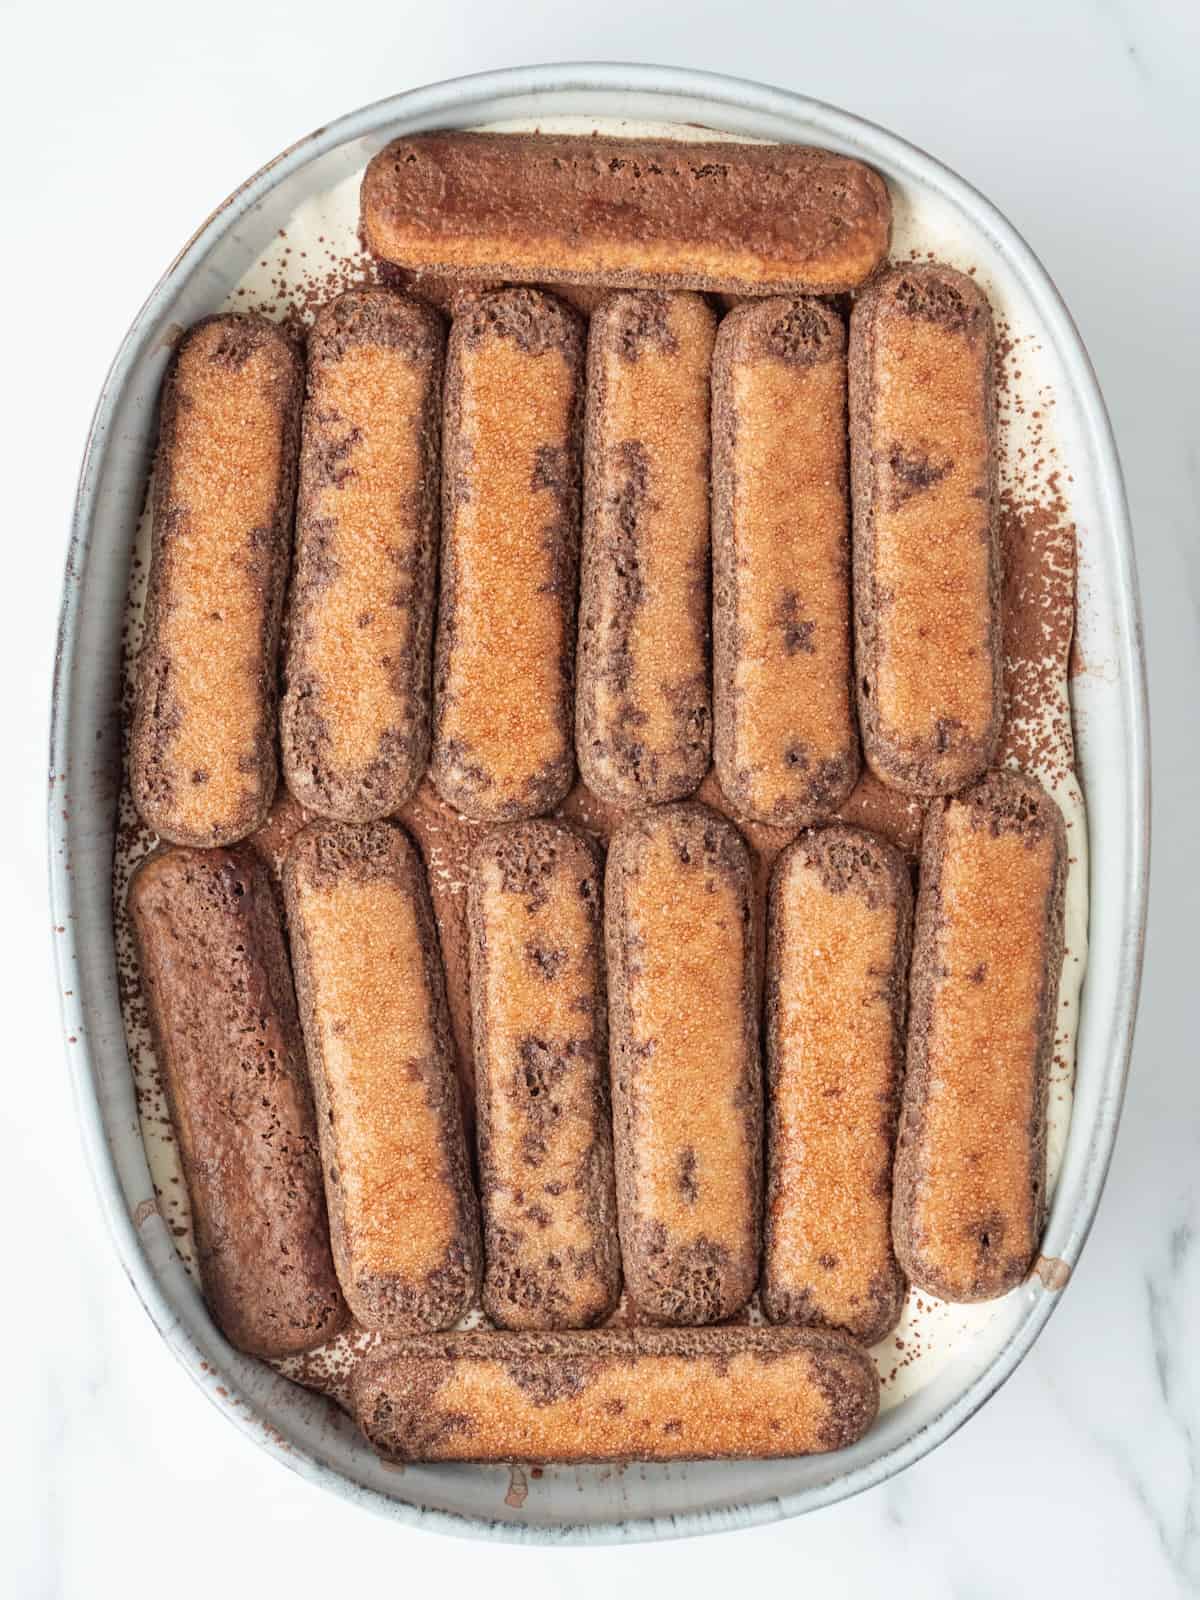 An oval platter with a second layer of espresso mixture soaked ladyfingers on top of an already layered ladyfinger and mascarpone mixture layer in order to construct a tiramisu.